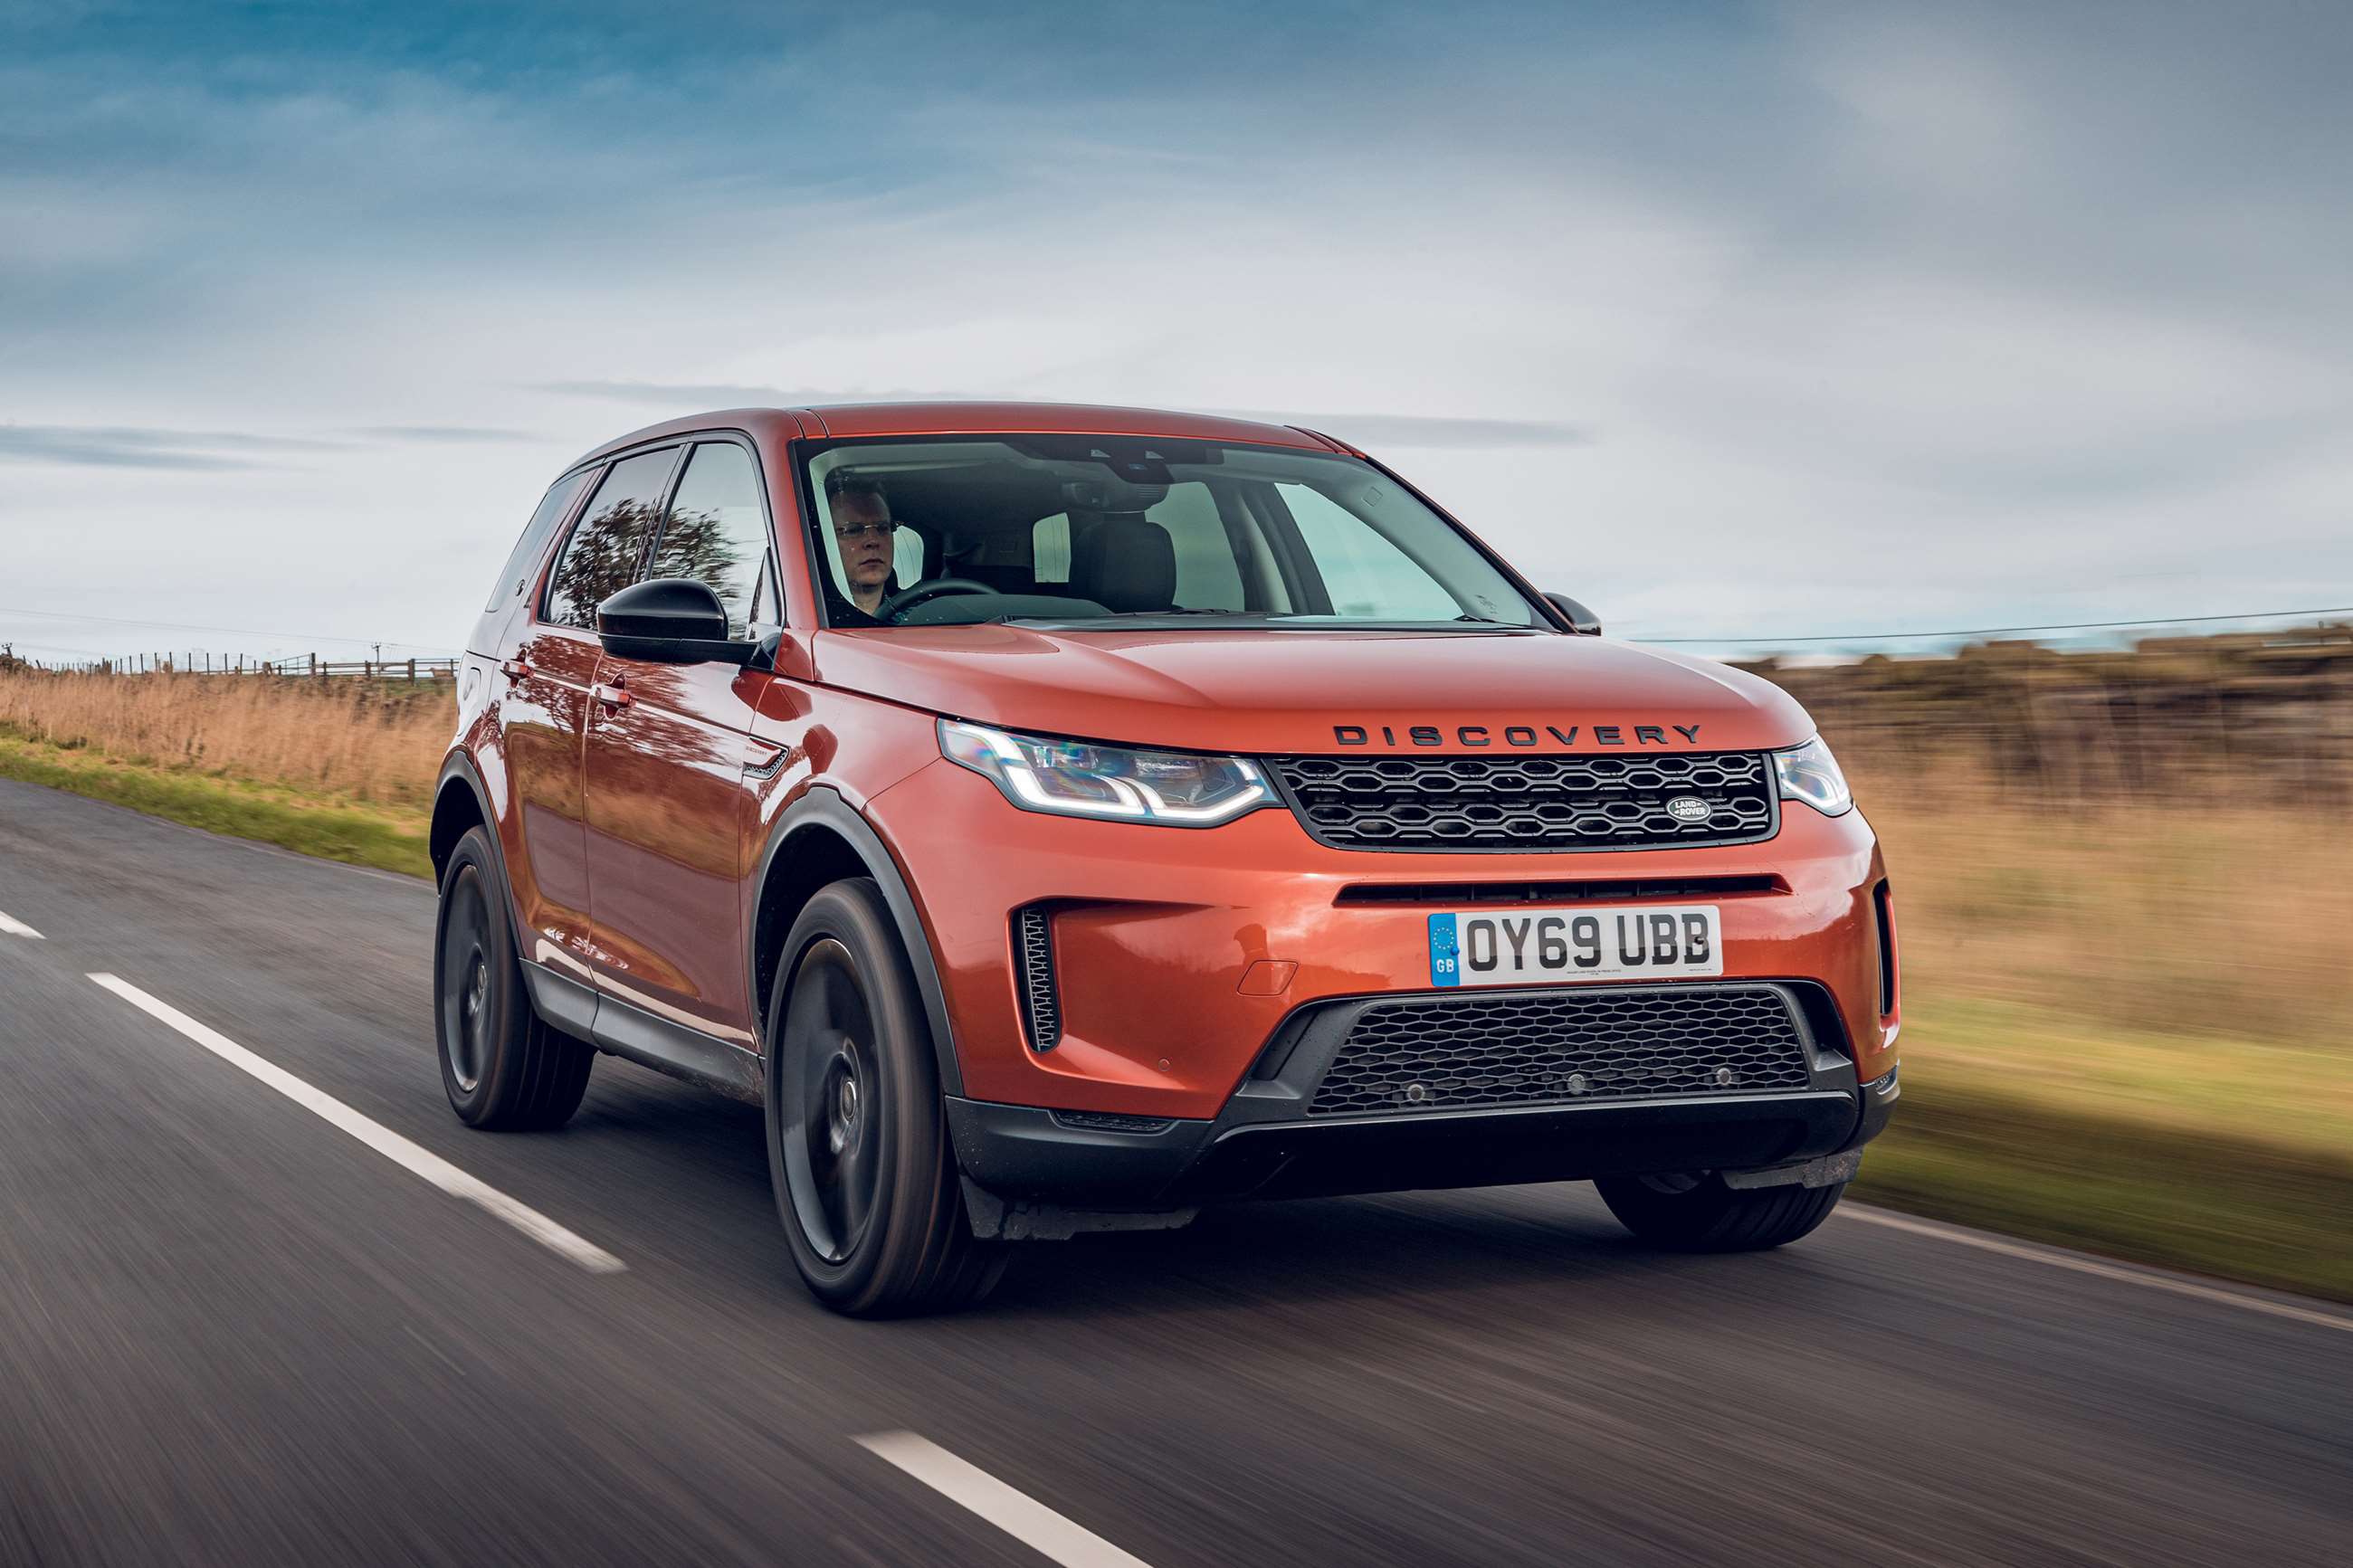 2020-land-rover-discovery-sport05111901.jpg